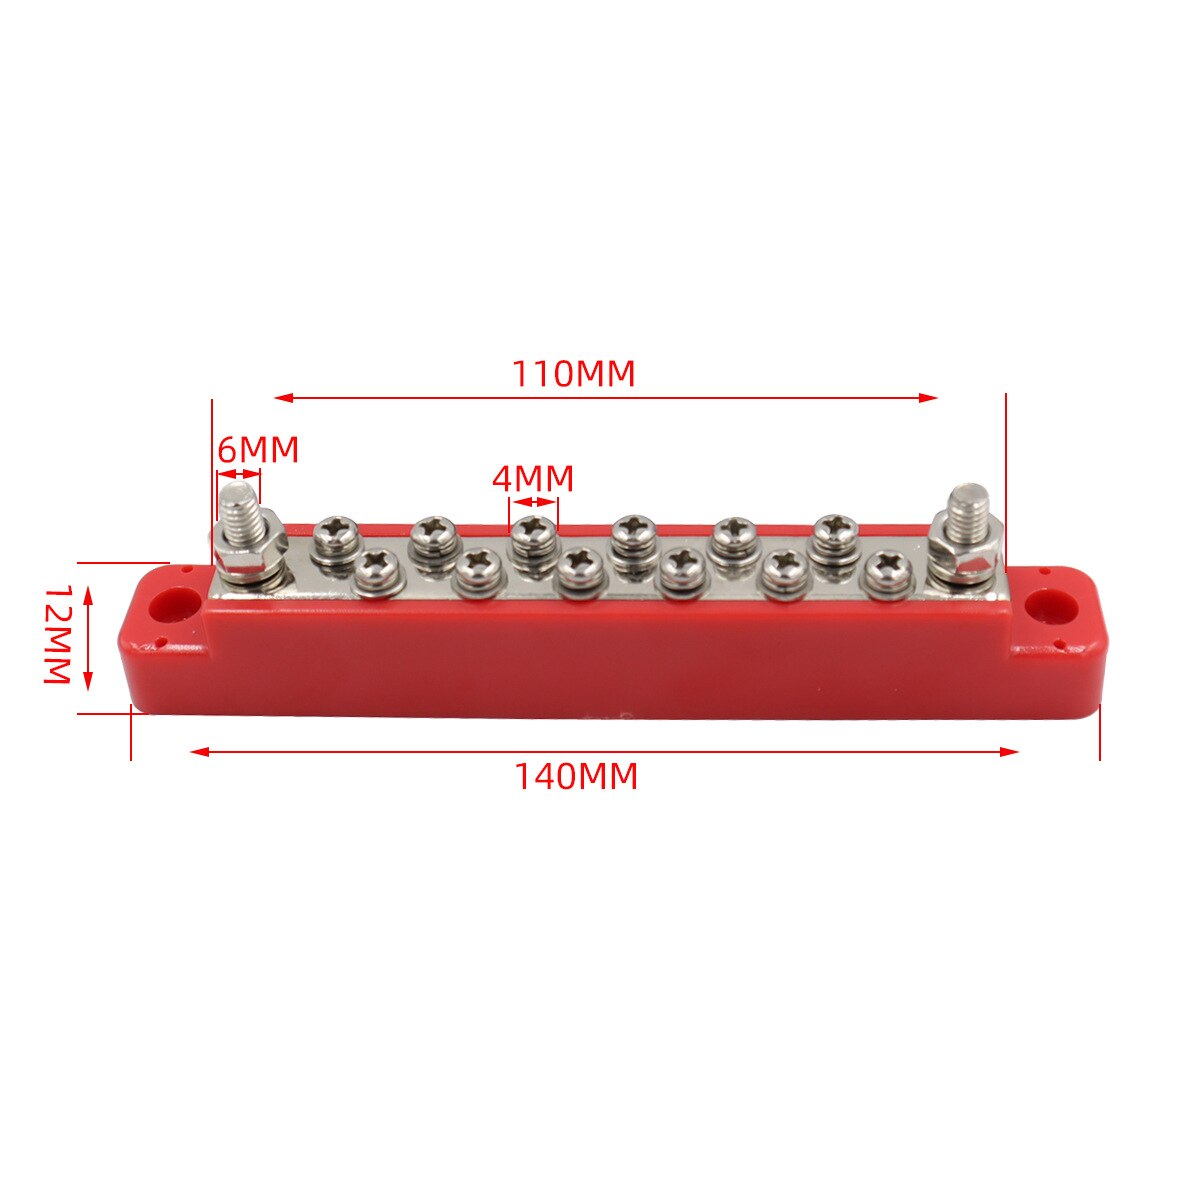 10 Post 14 Post Power Distribution Block Bus Bar with Cover 150A 48V Rating for Battery Terminal Distribution Block